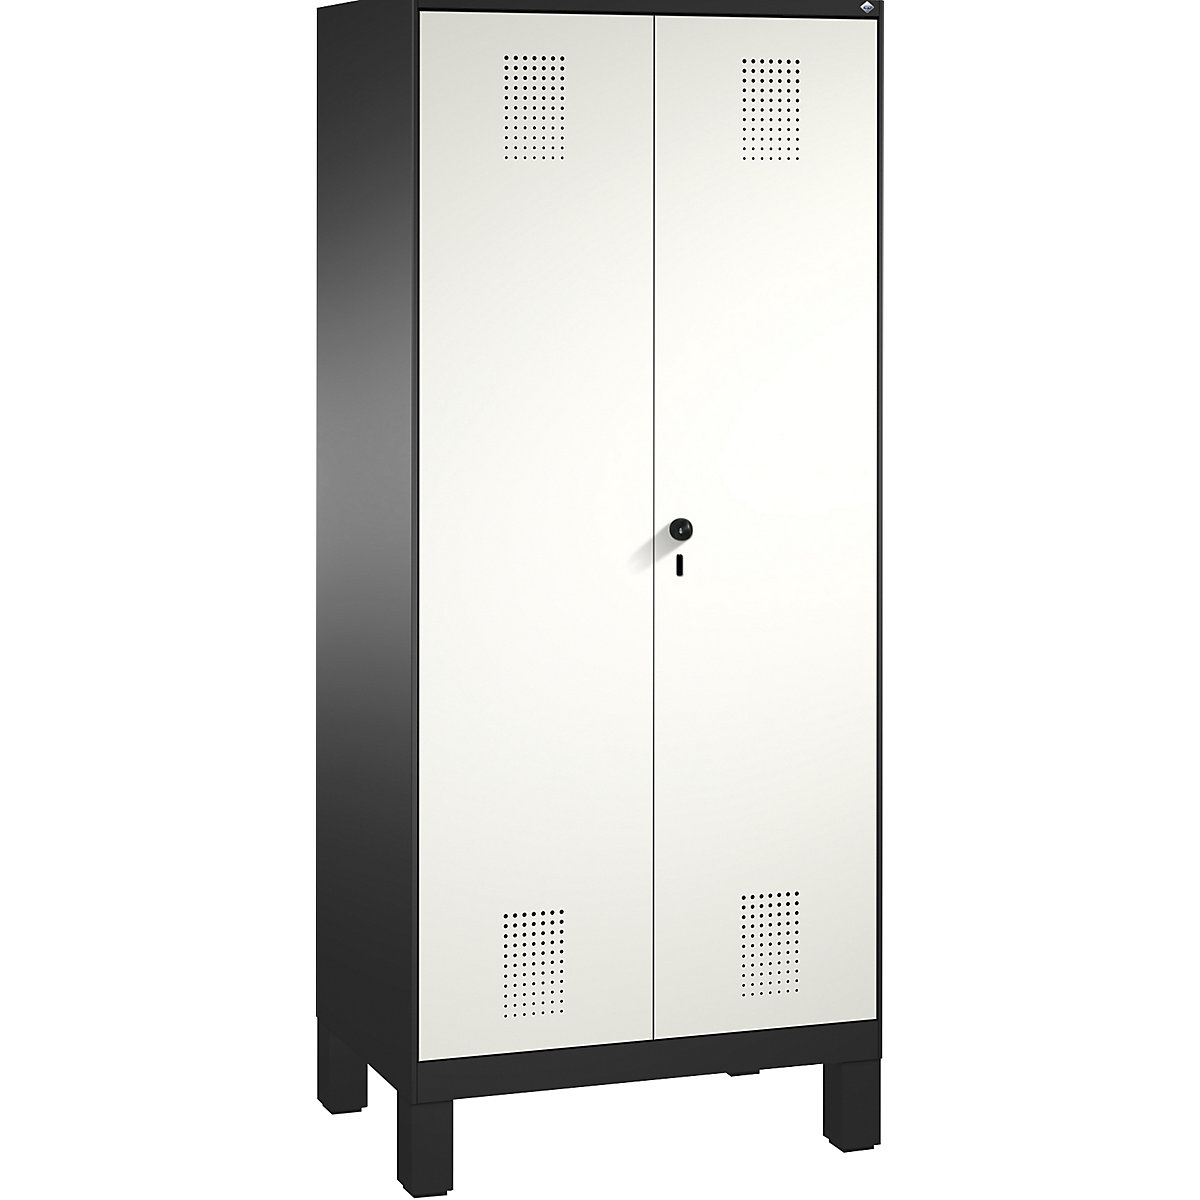 EVOLO cloakroom locker, doors close in the middle – C+P, 2 compartments, compartment width 400 mm, with feet, black grey / traffic white-13